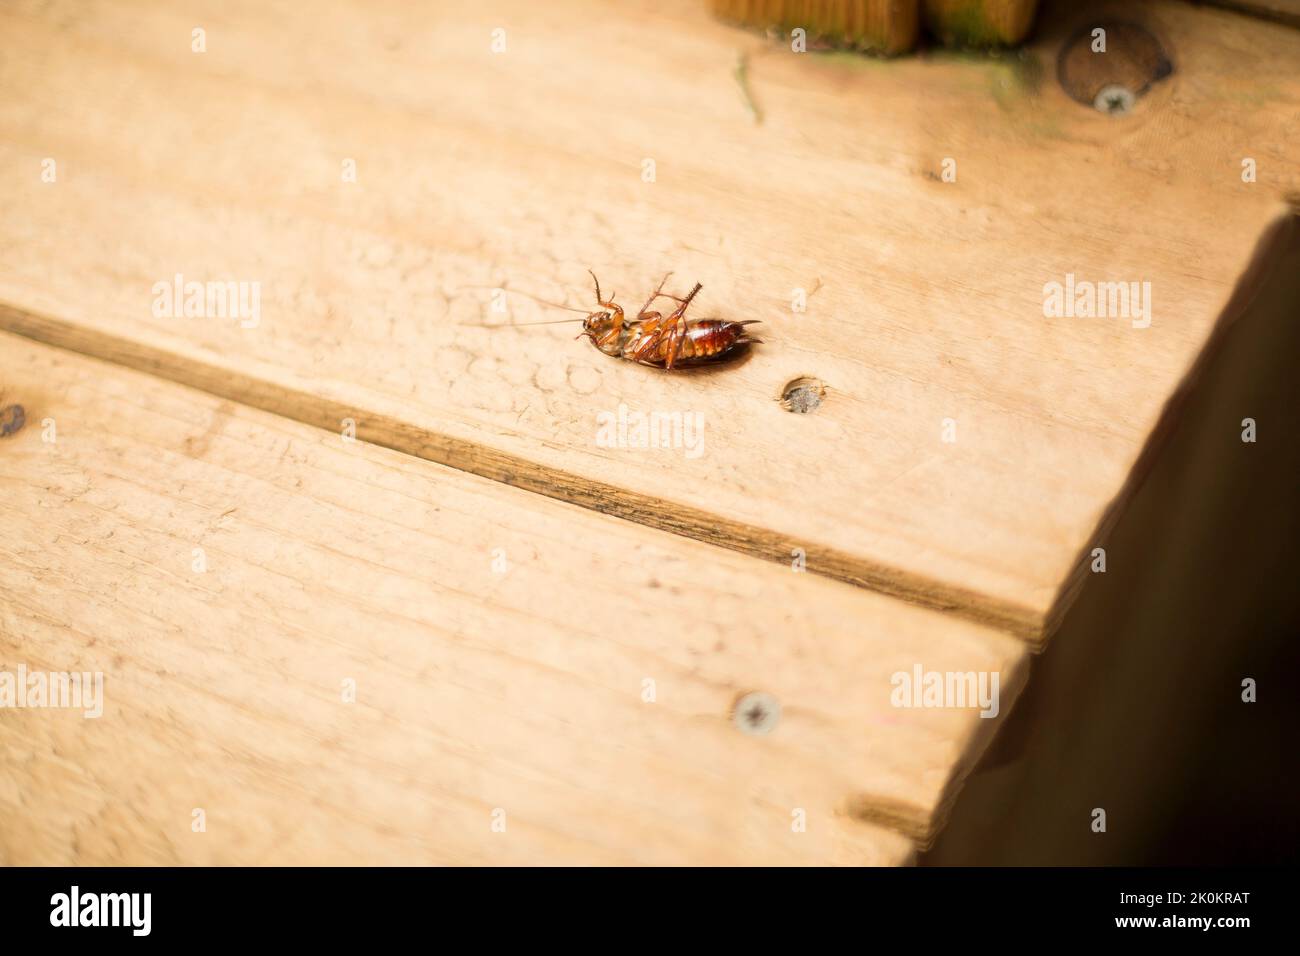 Dying cockroach on its back. Stock Photo